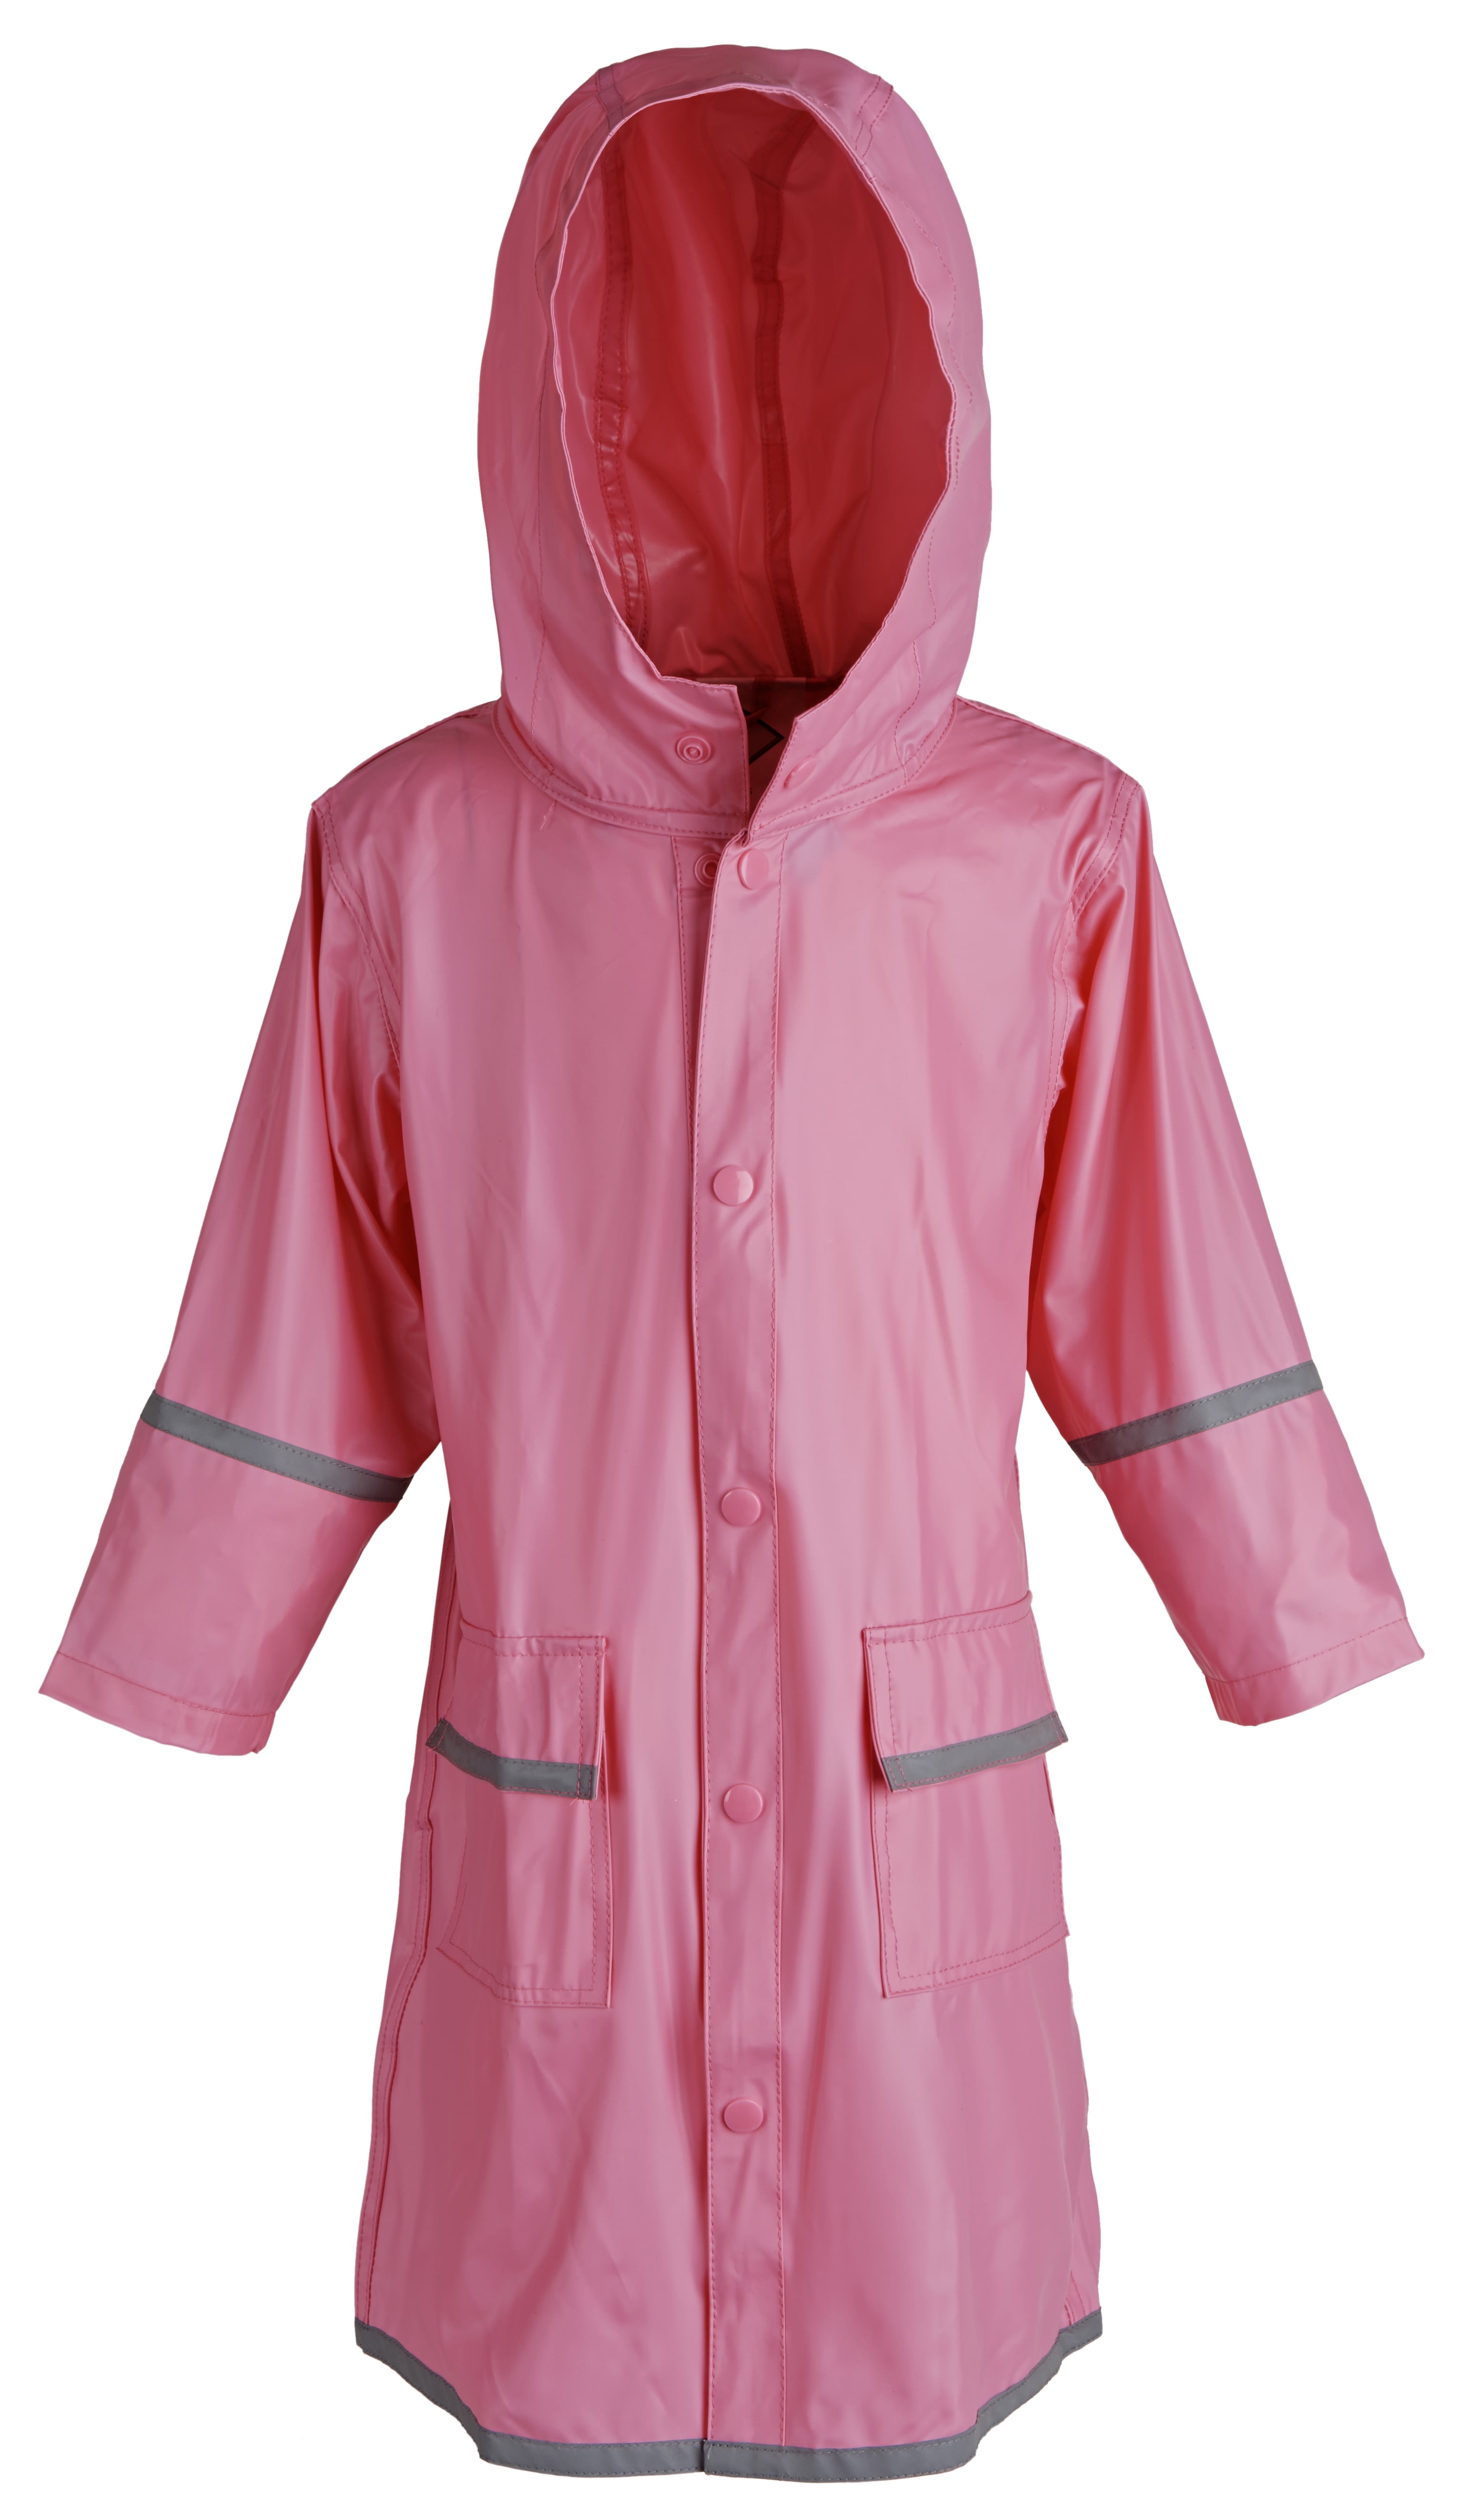 Kids Hooded Rainsuit Waterproof Coverall Toddler Rain Wear for Boys and Girs 2-12 Years